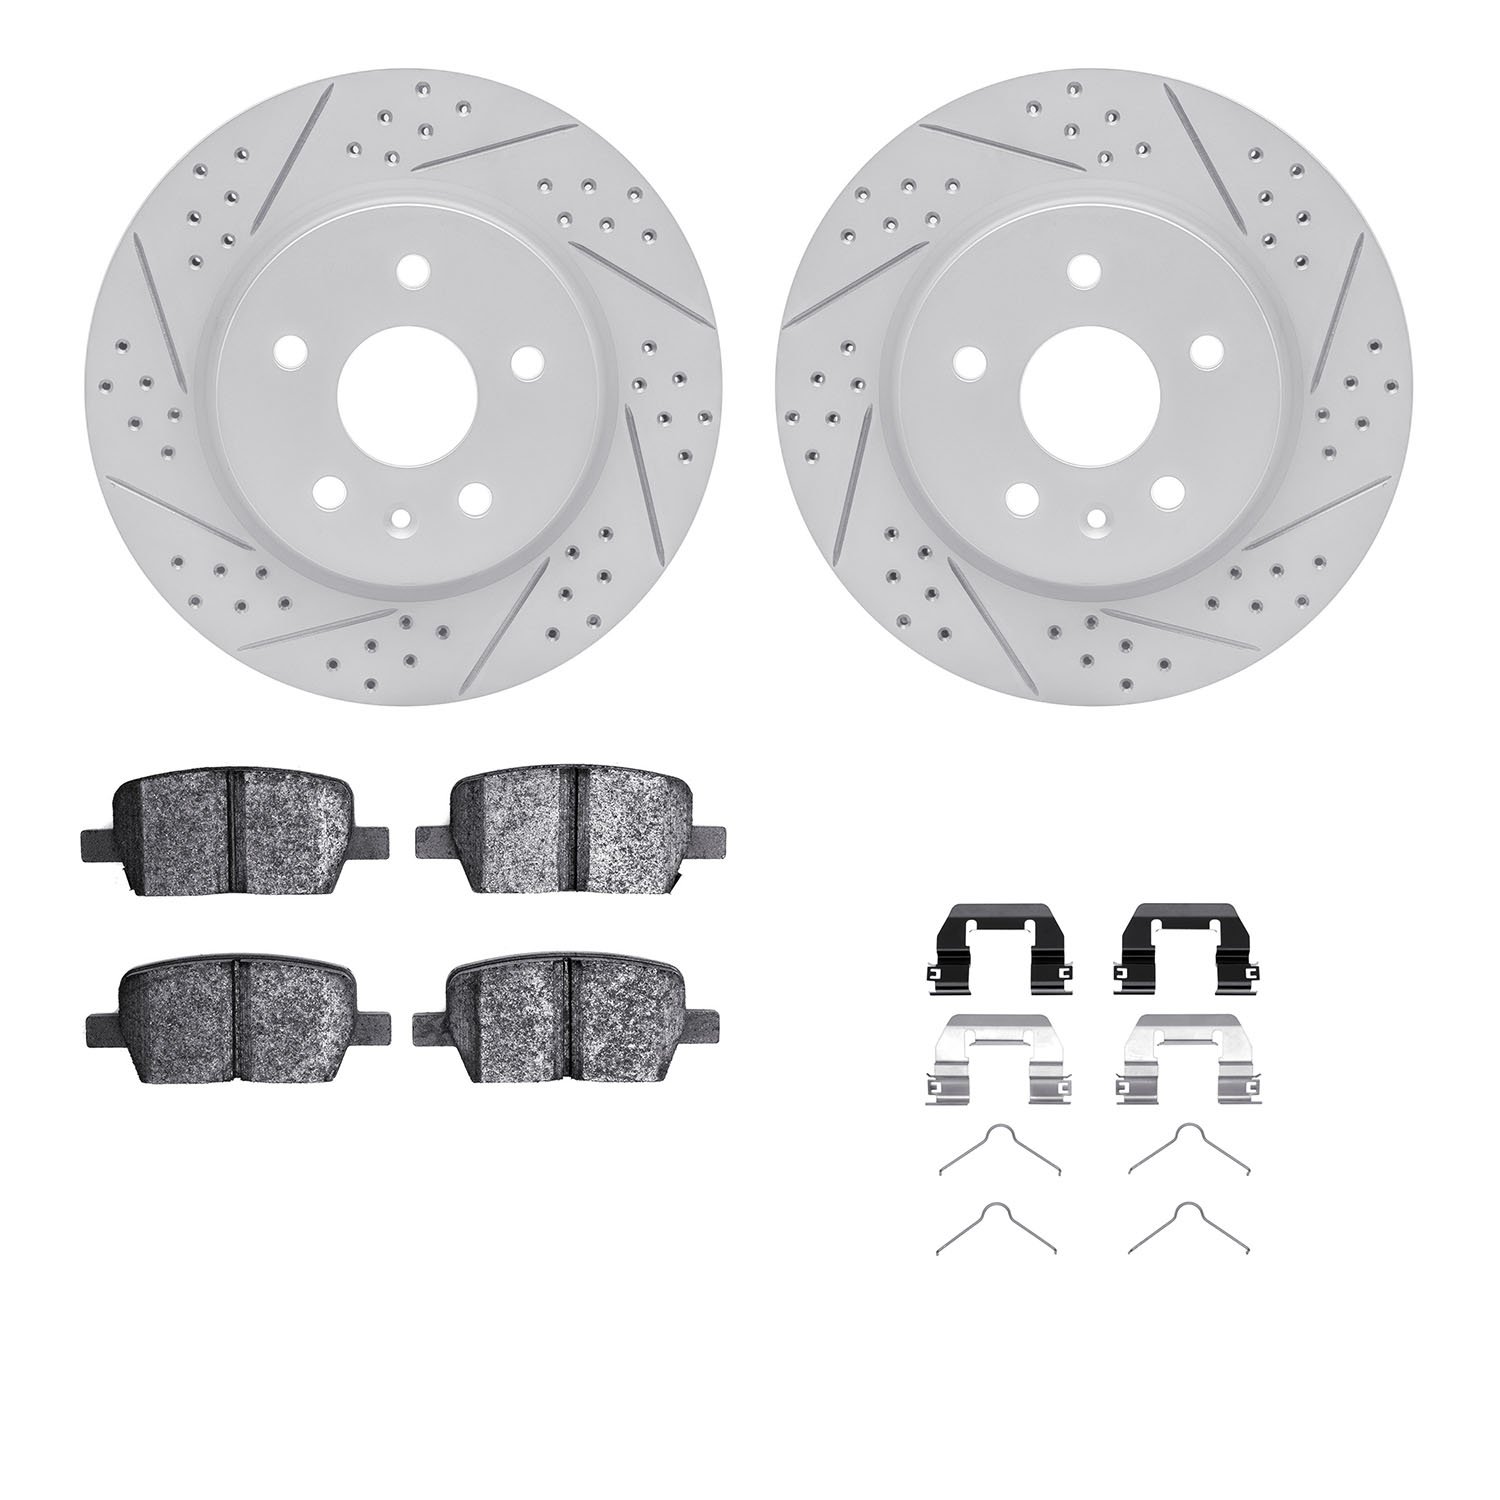 2512-65022 Geoperformance Drilled/Slotted Rotors w/5000 Advanced Brake Pads Kit & Hardware, Fits Select GM, Position: Rear